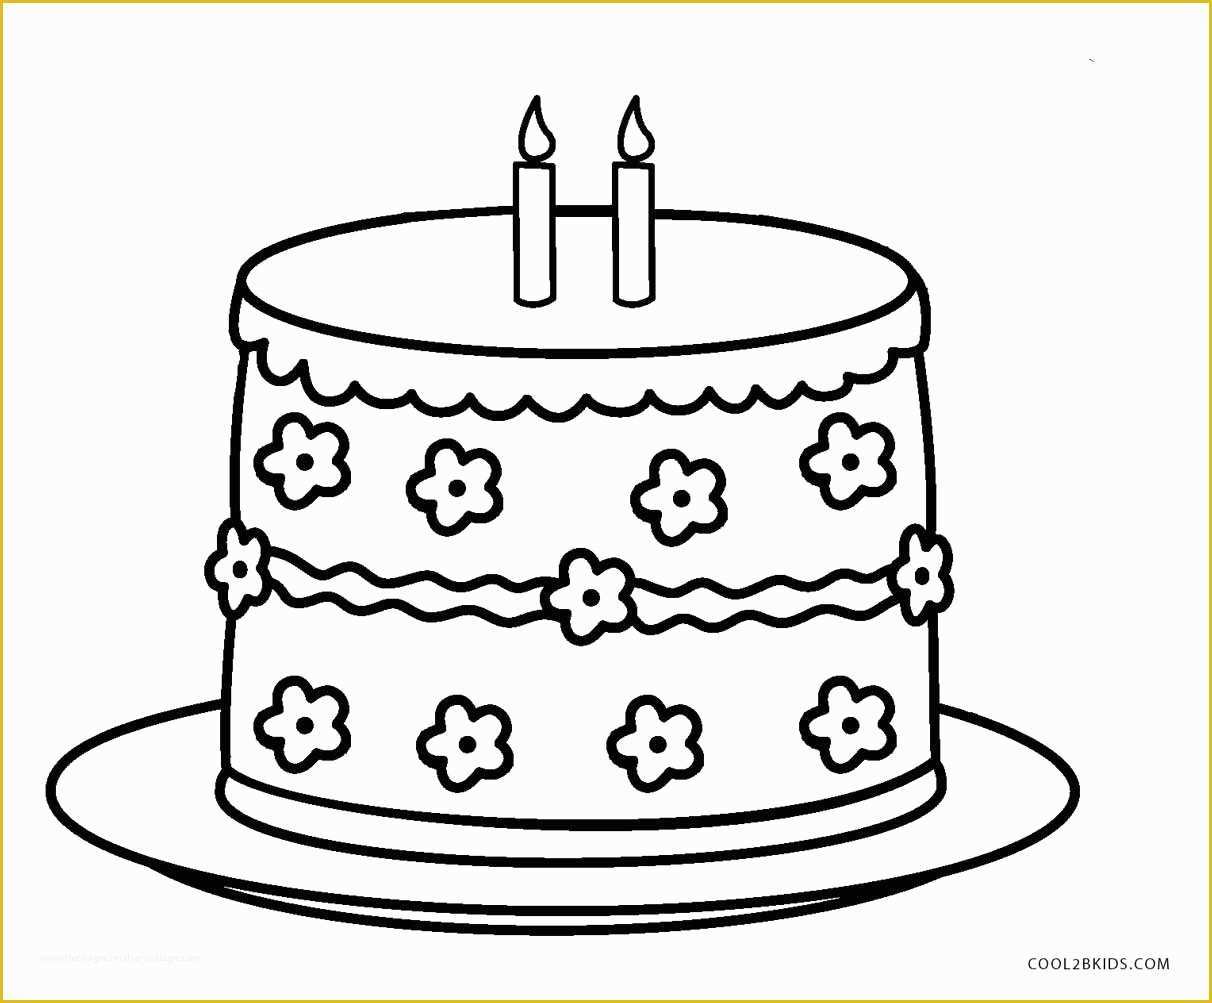 Free Printable Cake Templates Of Tiered Cake Coloring Coloring Pages